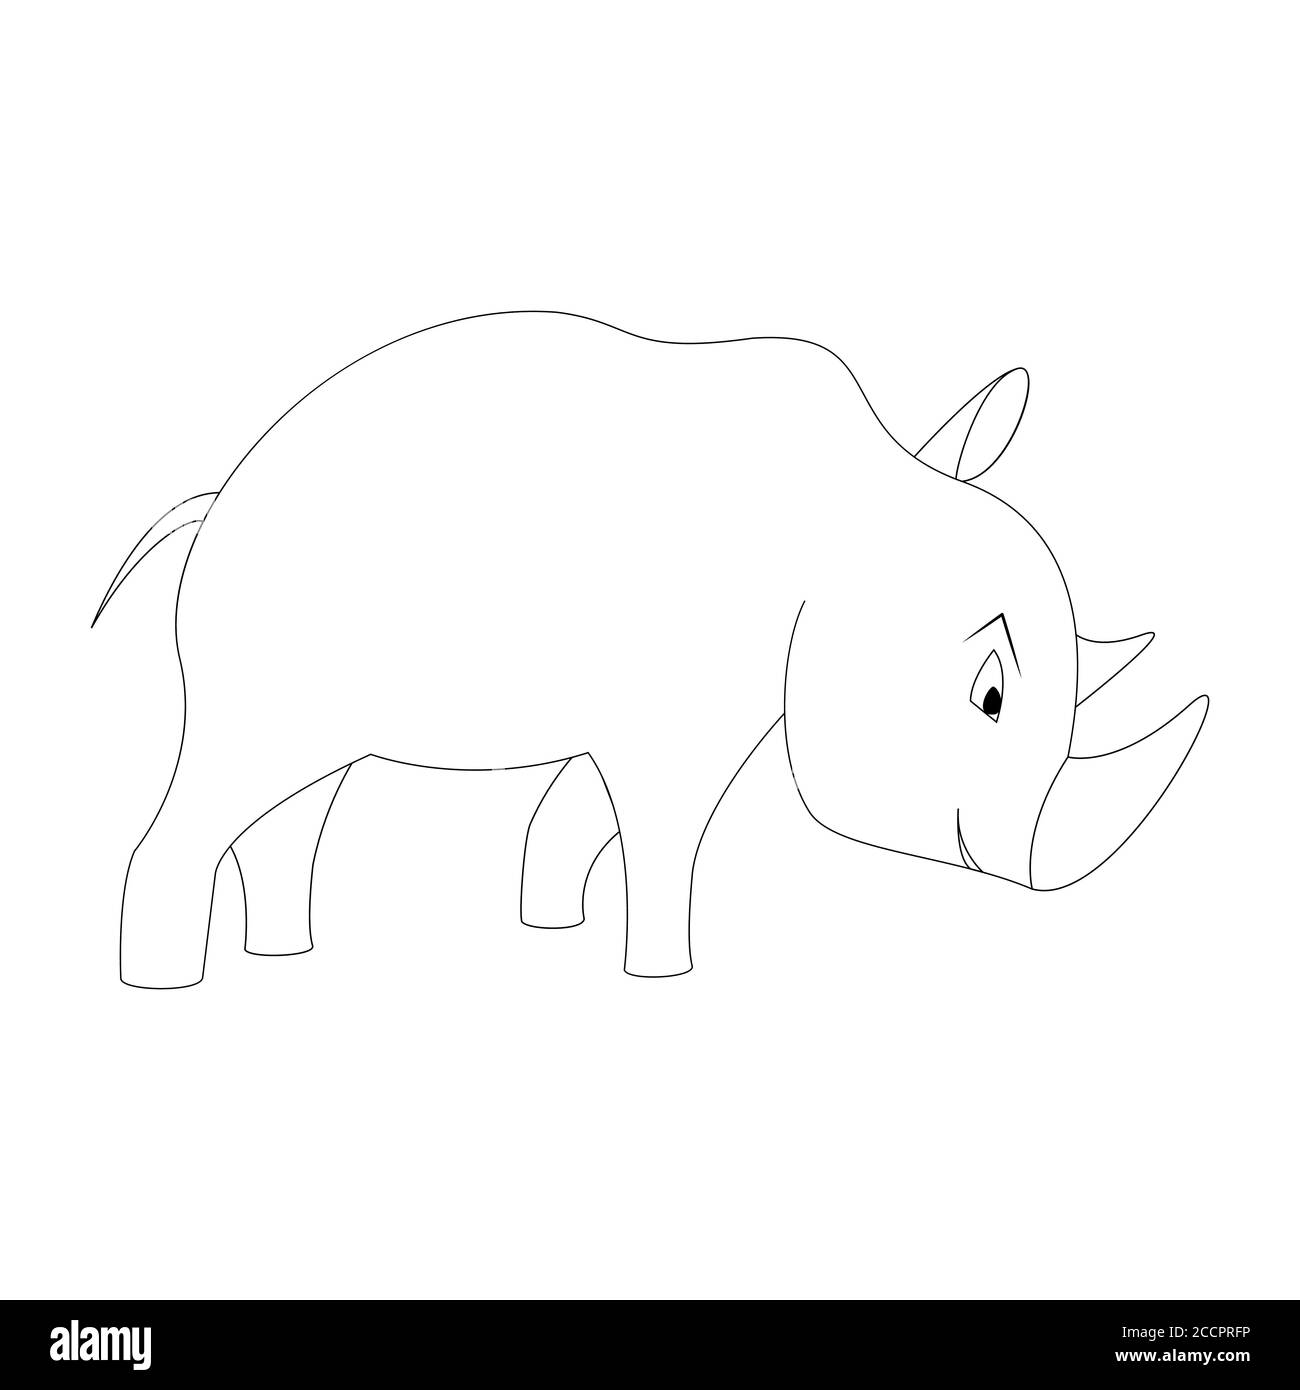 Cartoon rhinoceros outline. Vector illustration isolated on white background. Decoration for greeting cards, posters, flyers, prints for clothes. Stock Vector